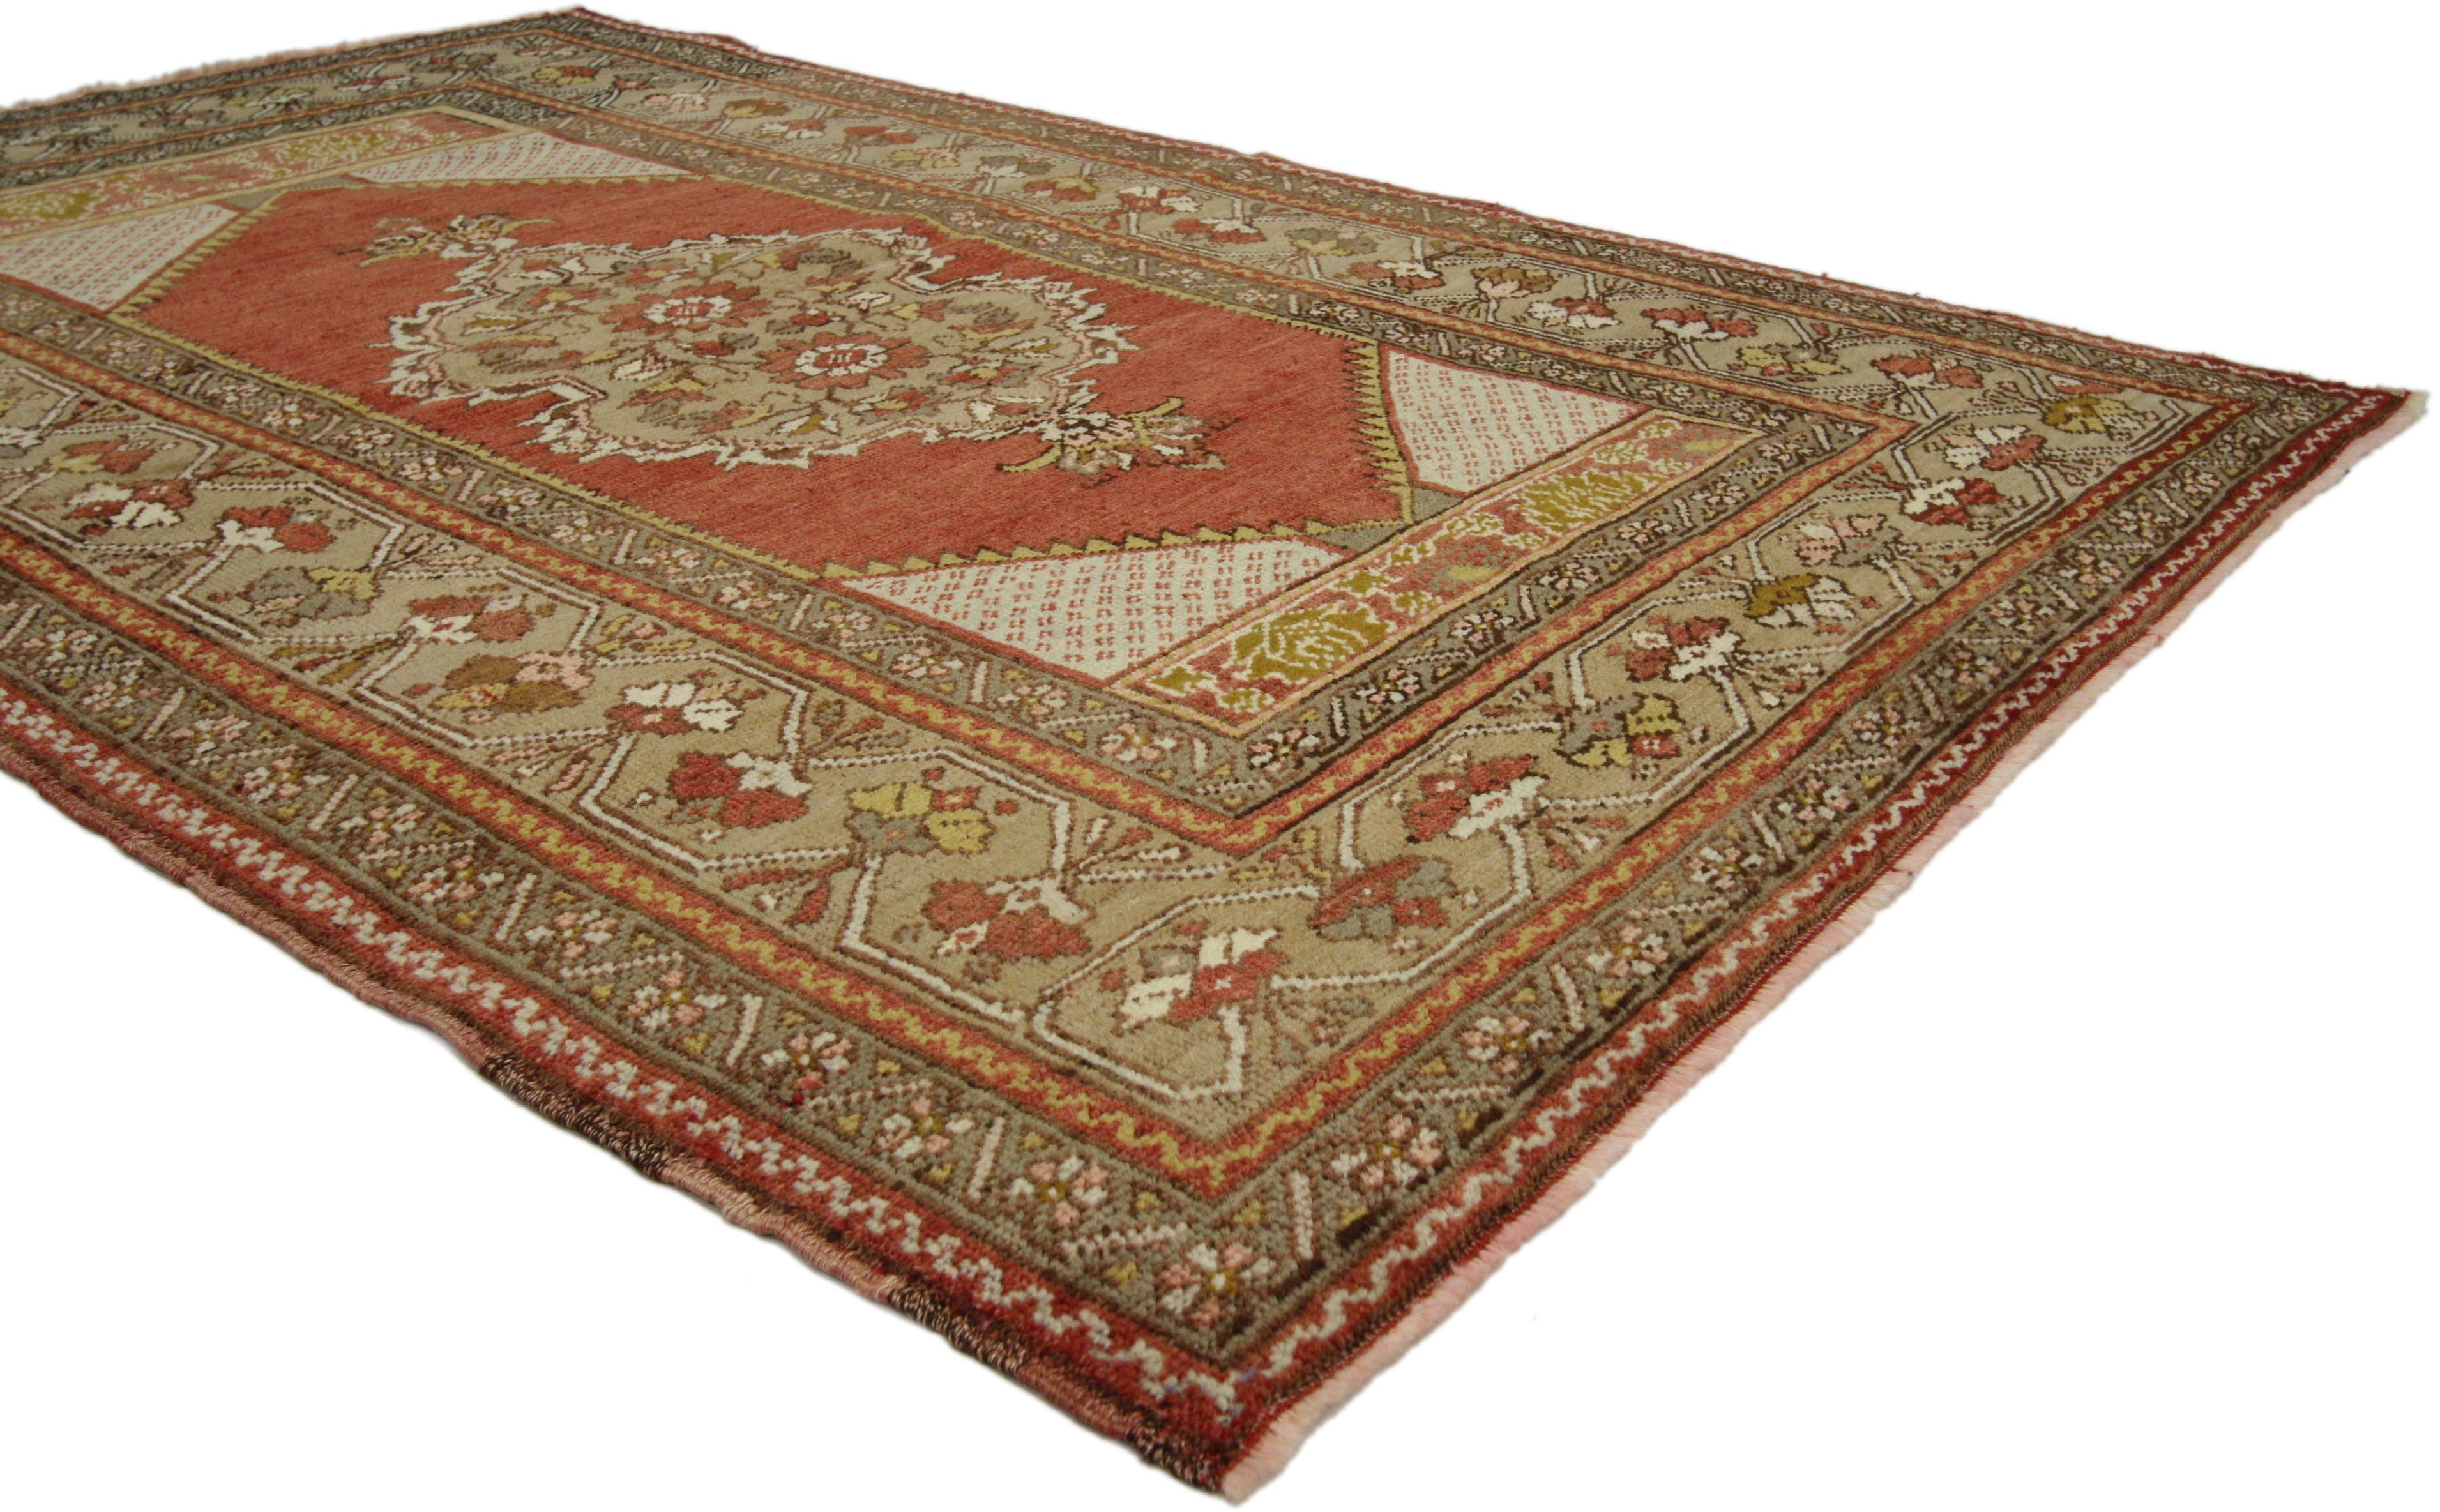 73855, Vintage Turkish Oushak Rug for Kitchen, Bathroom, Foyer or Entry Rug, 03'07 X 05'06. This hand-knotted wool vintage Turkish Oushak rug features a modern traditional style. Immersed in Anatolian history and refined colors, this vintage Turkish